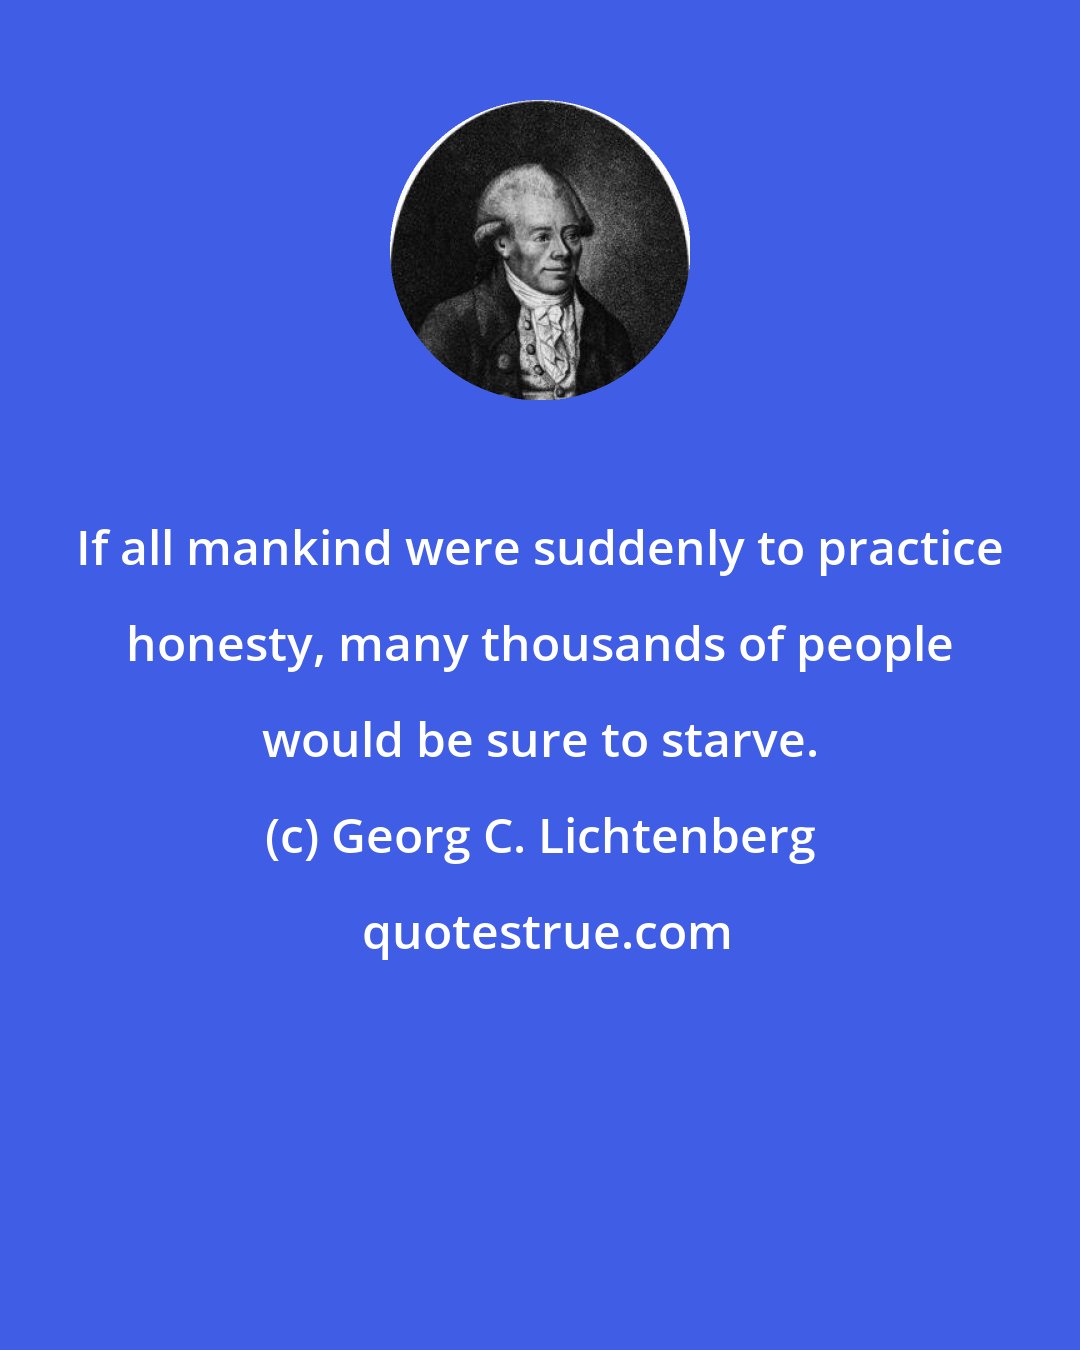 Georg C. Lichtenberg: If all mankind were suddenly to practice honesty, many thousands of people would be sure to starve.